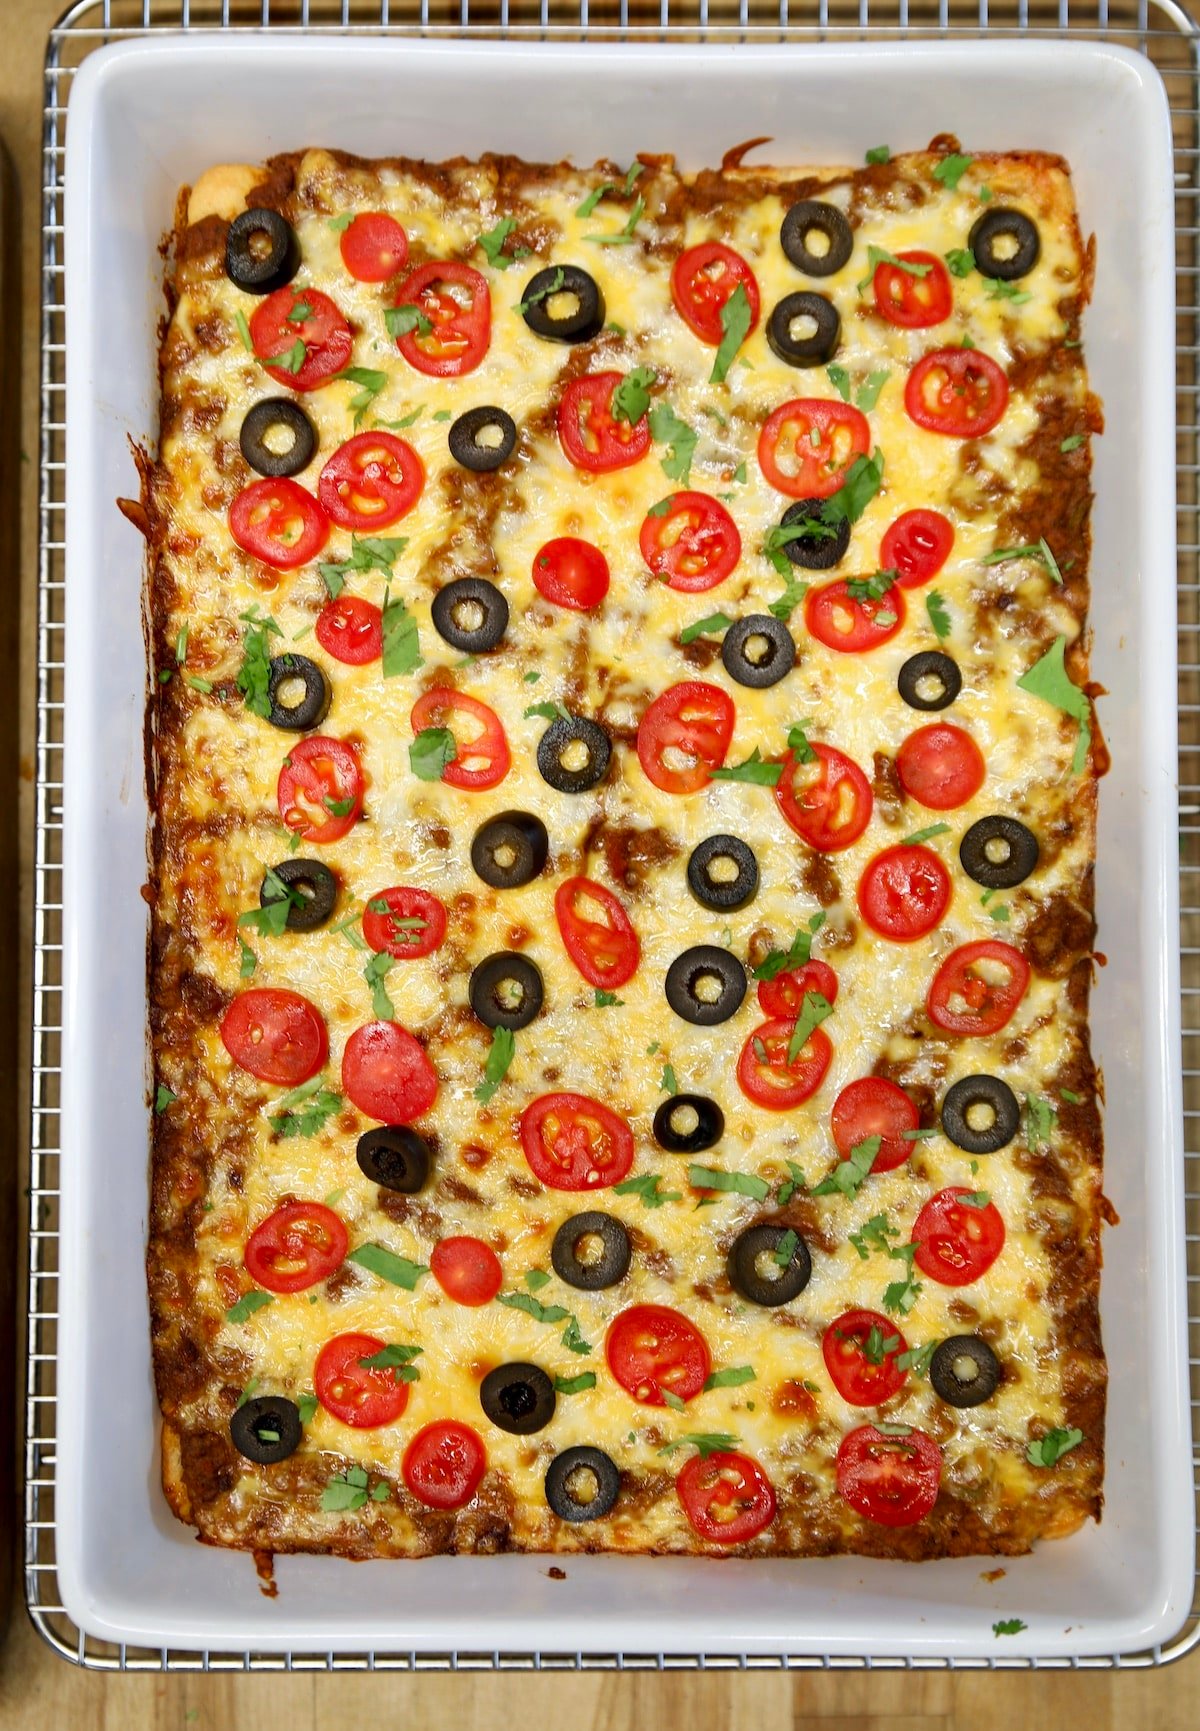 Burrito casserole bake with tomatoes and olives.